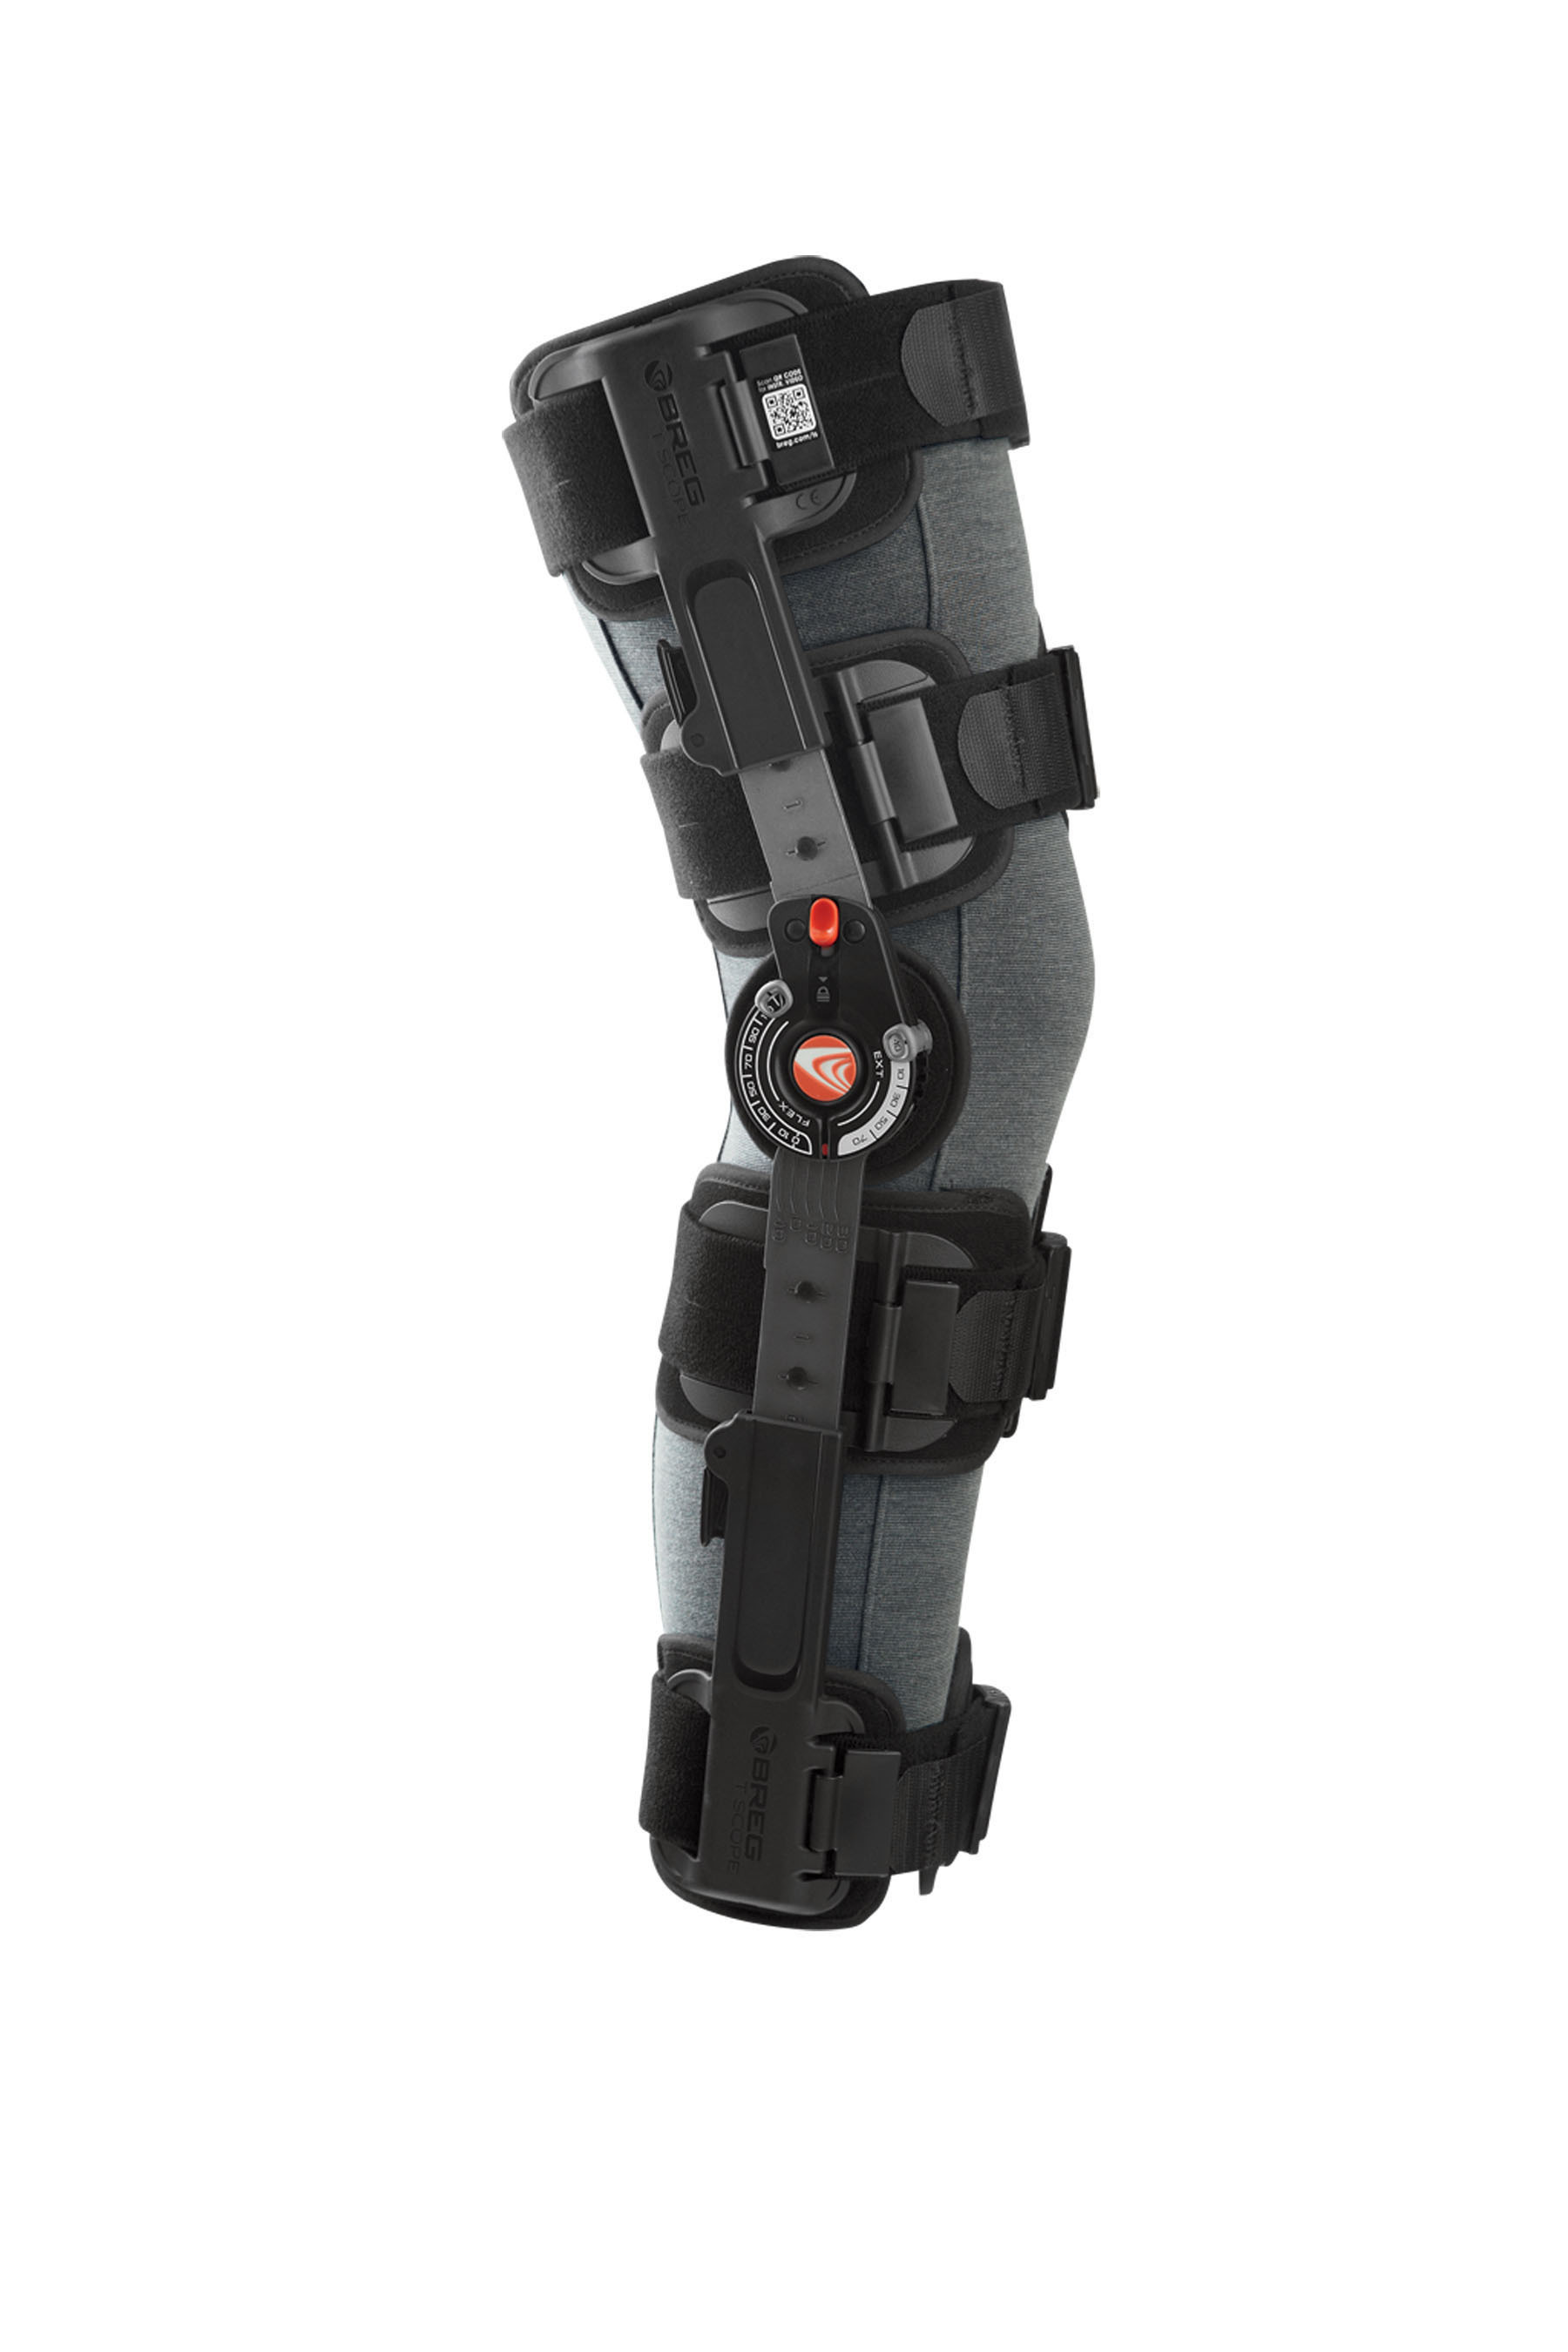 Breg Introduces Post-operative Knee Brace and Other New Orthopedic